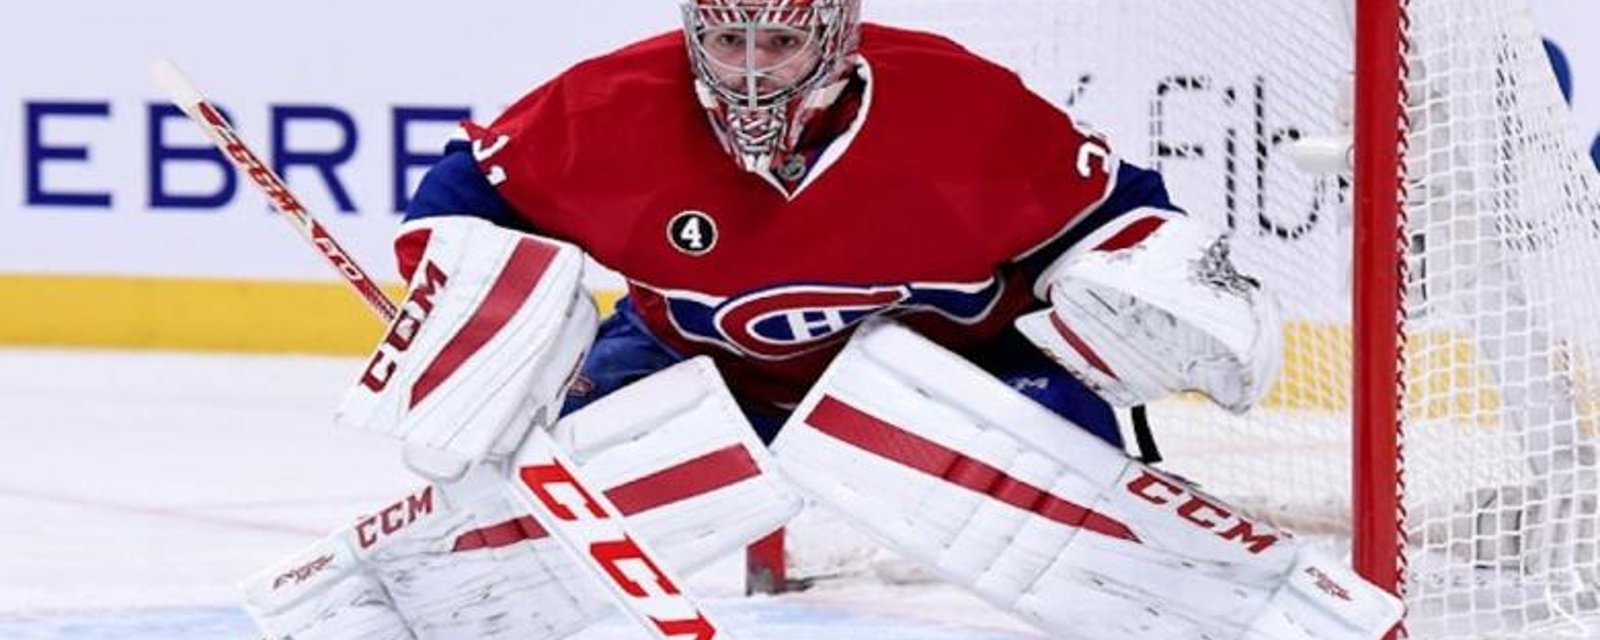 Important update on Carey Price's injury.